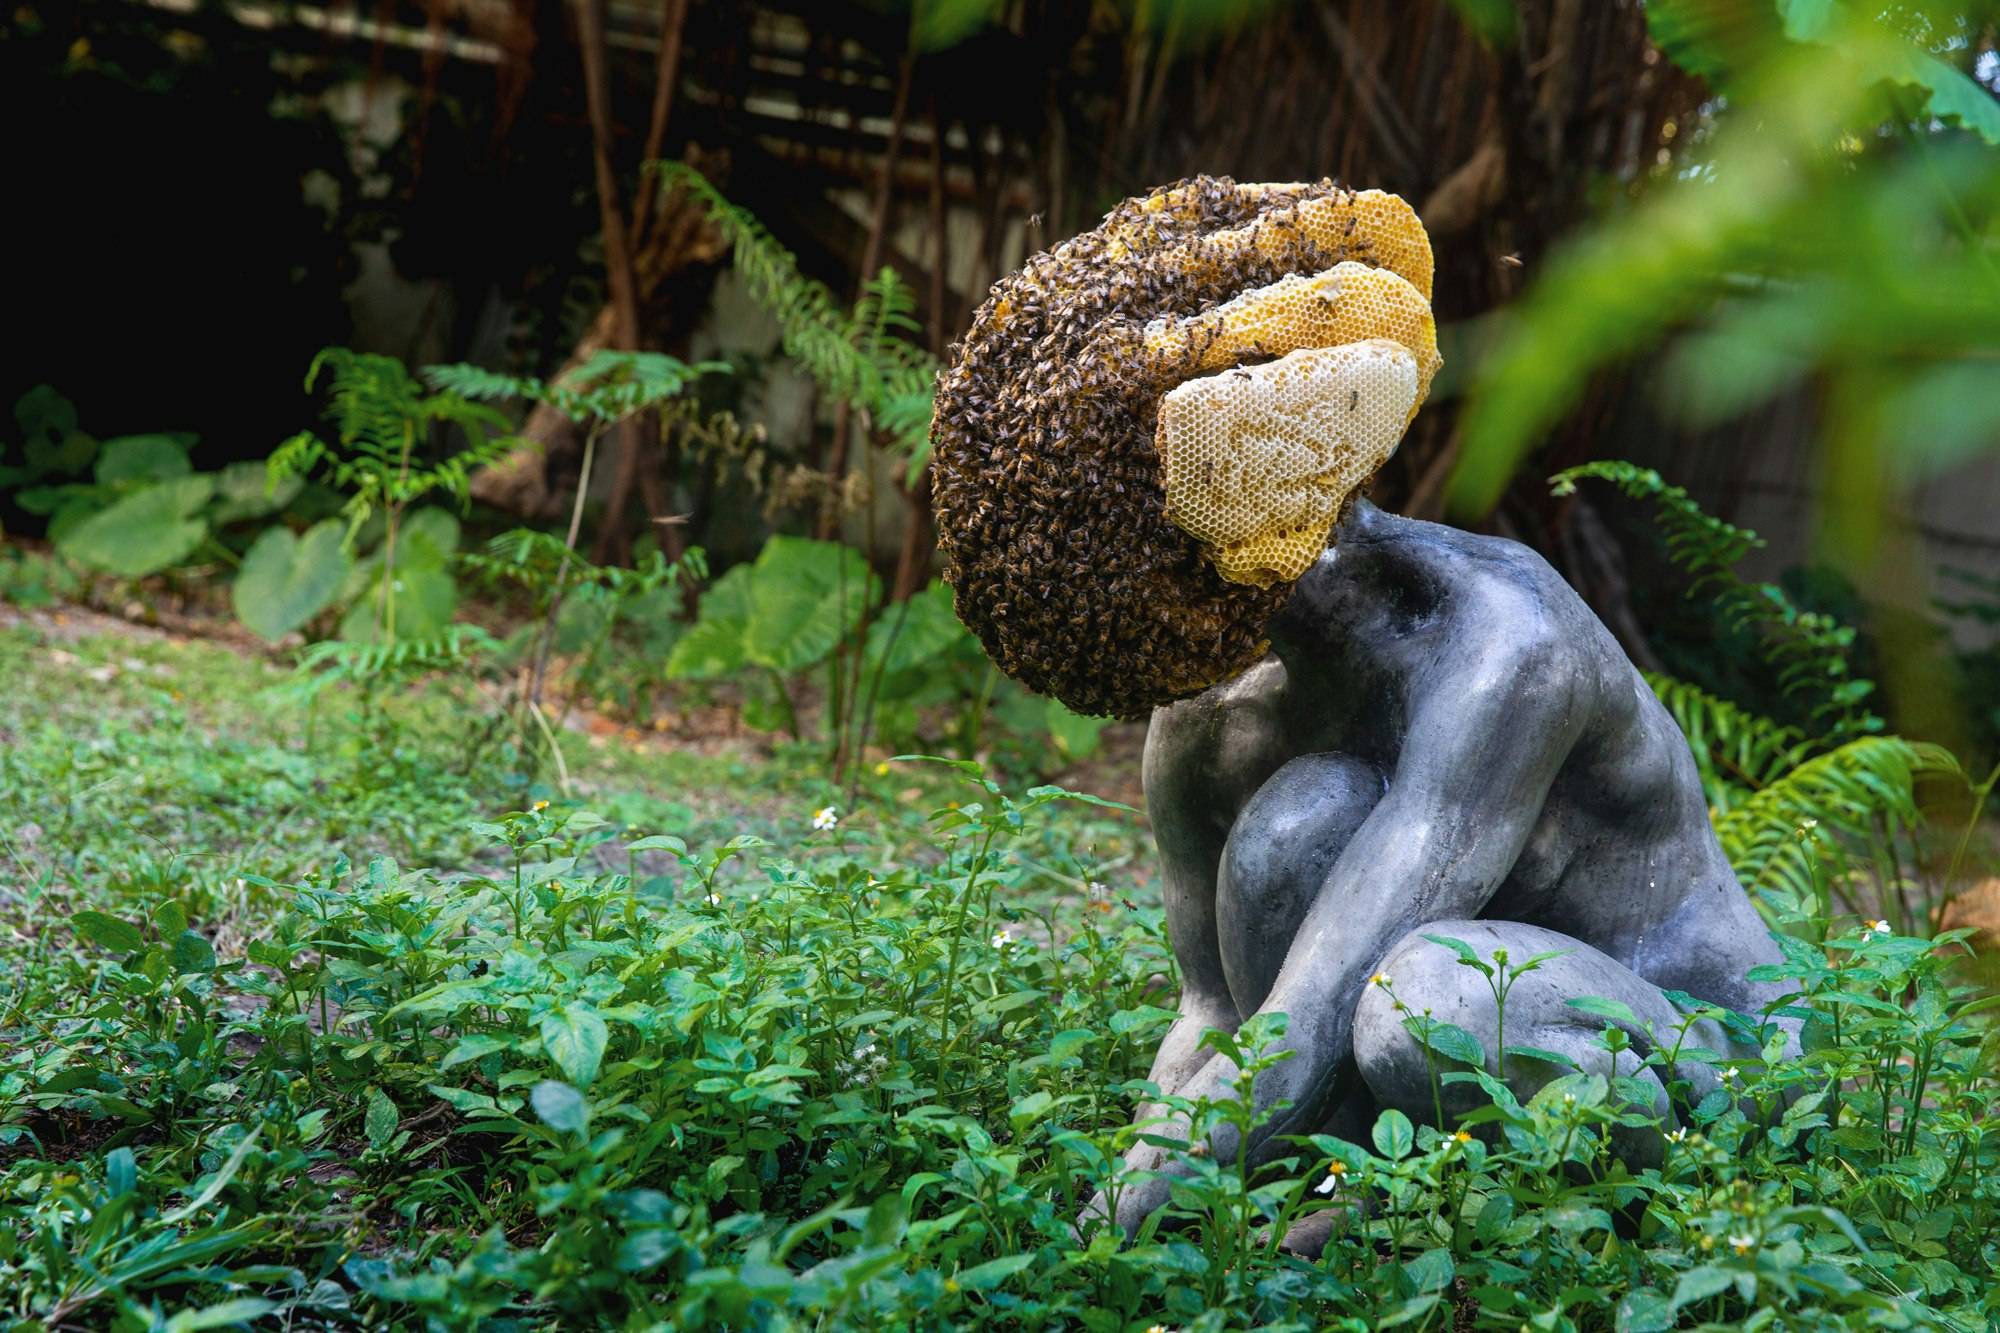 Live bee colony covering the head of a concrete cast body. The body is crouching and is placed in a garden.